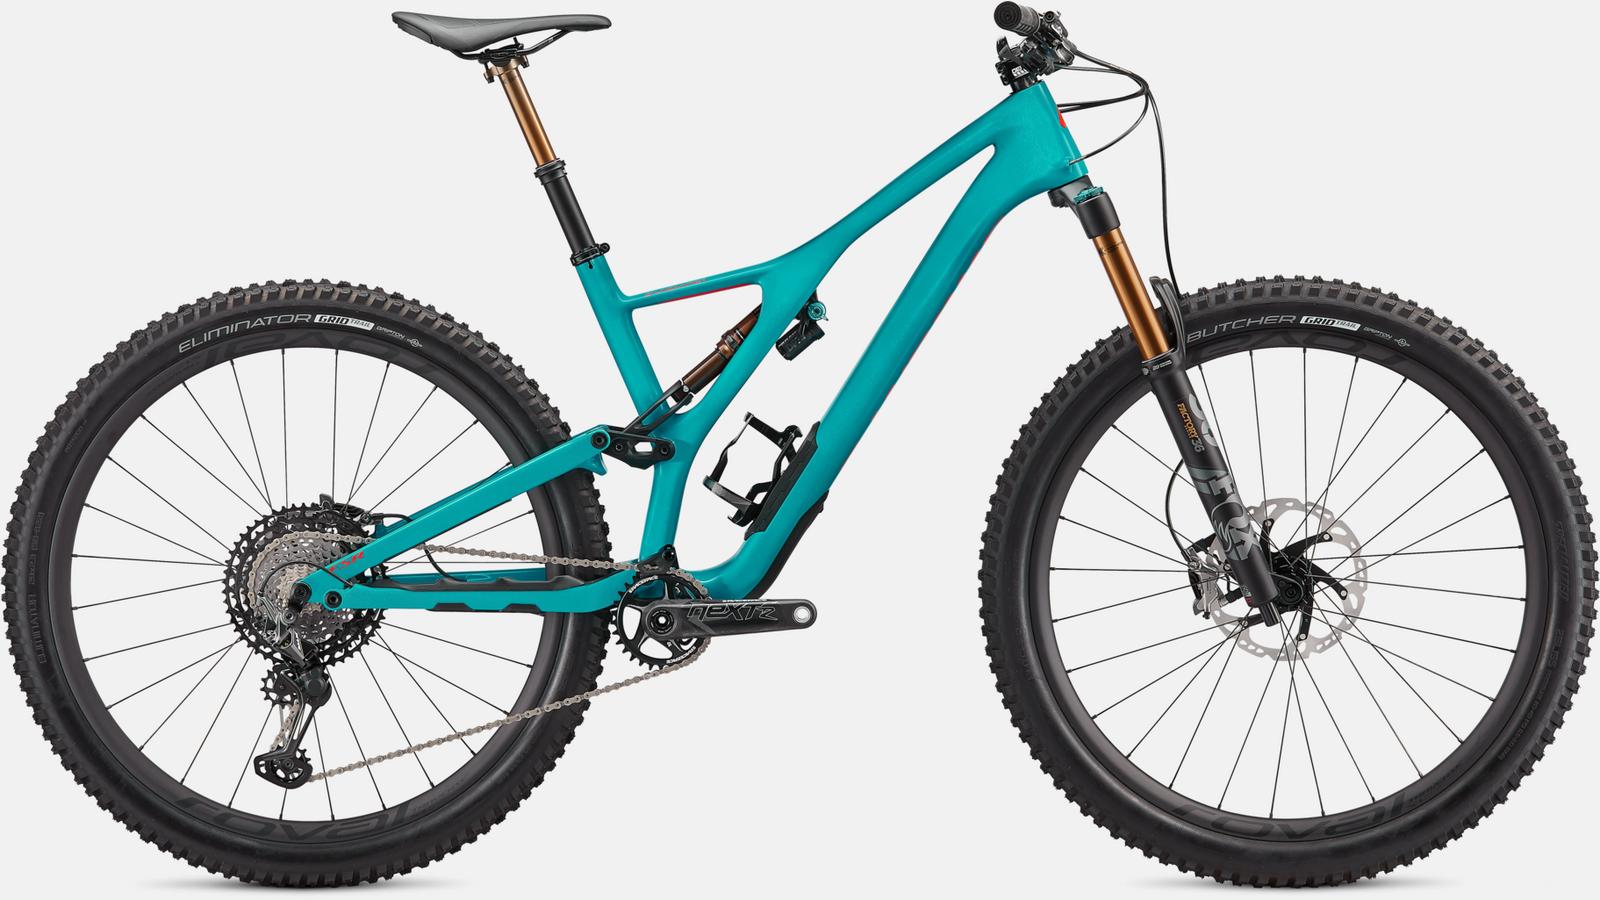 Paint for 2020 Specialized S-Works Stumpjumper 29 - Gloss Aqua